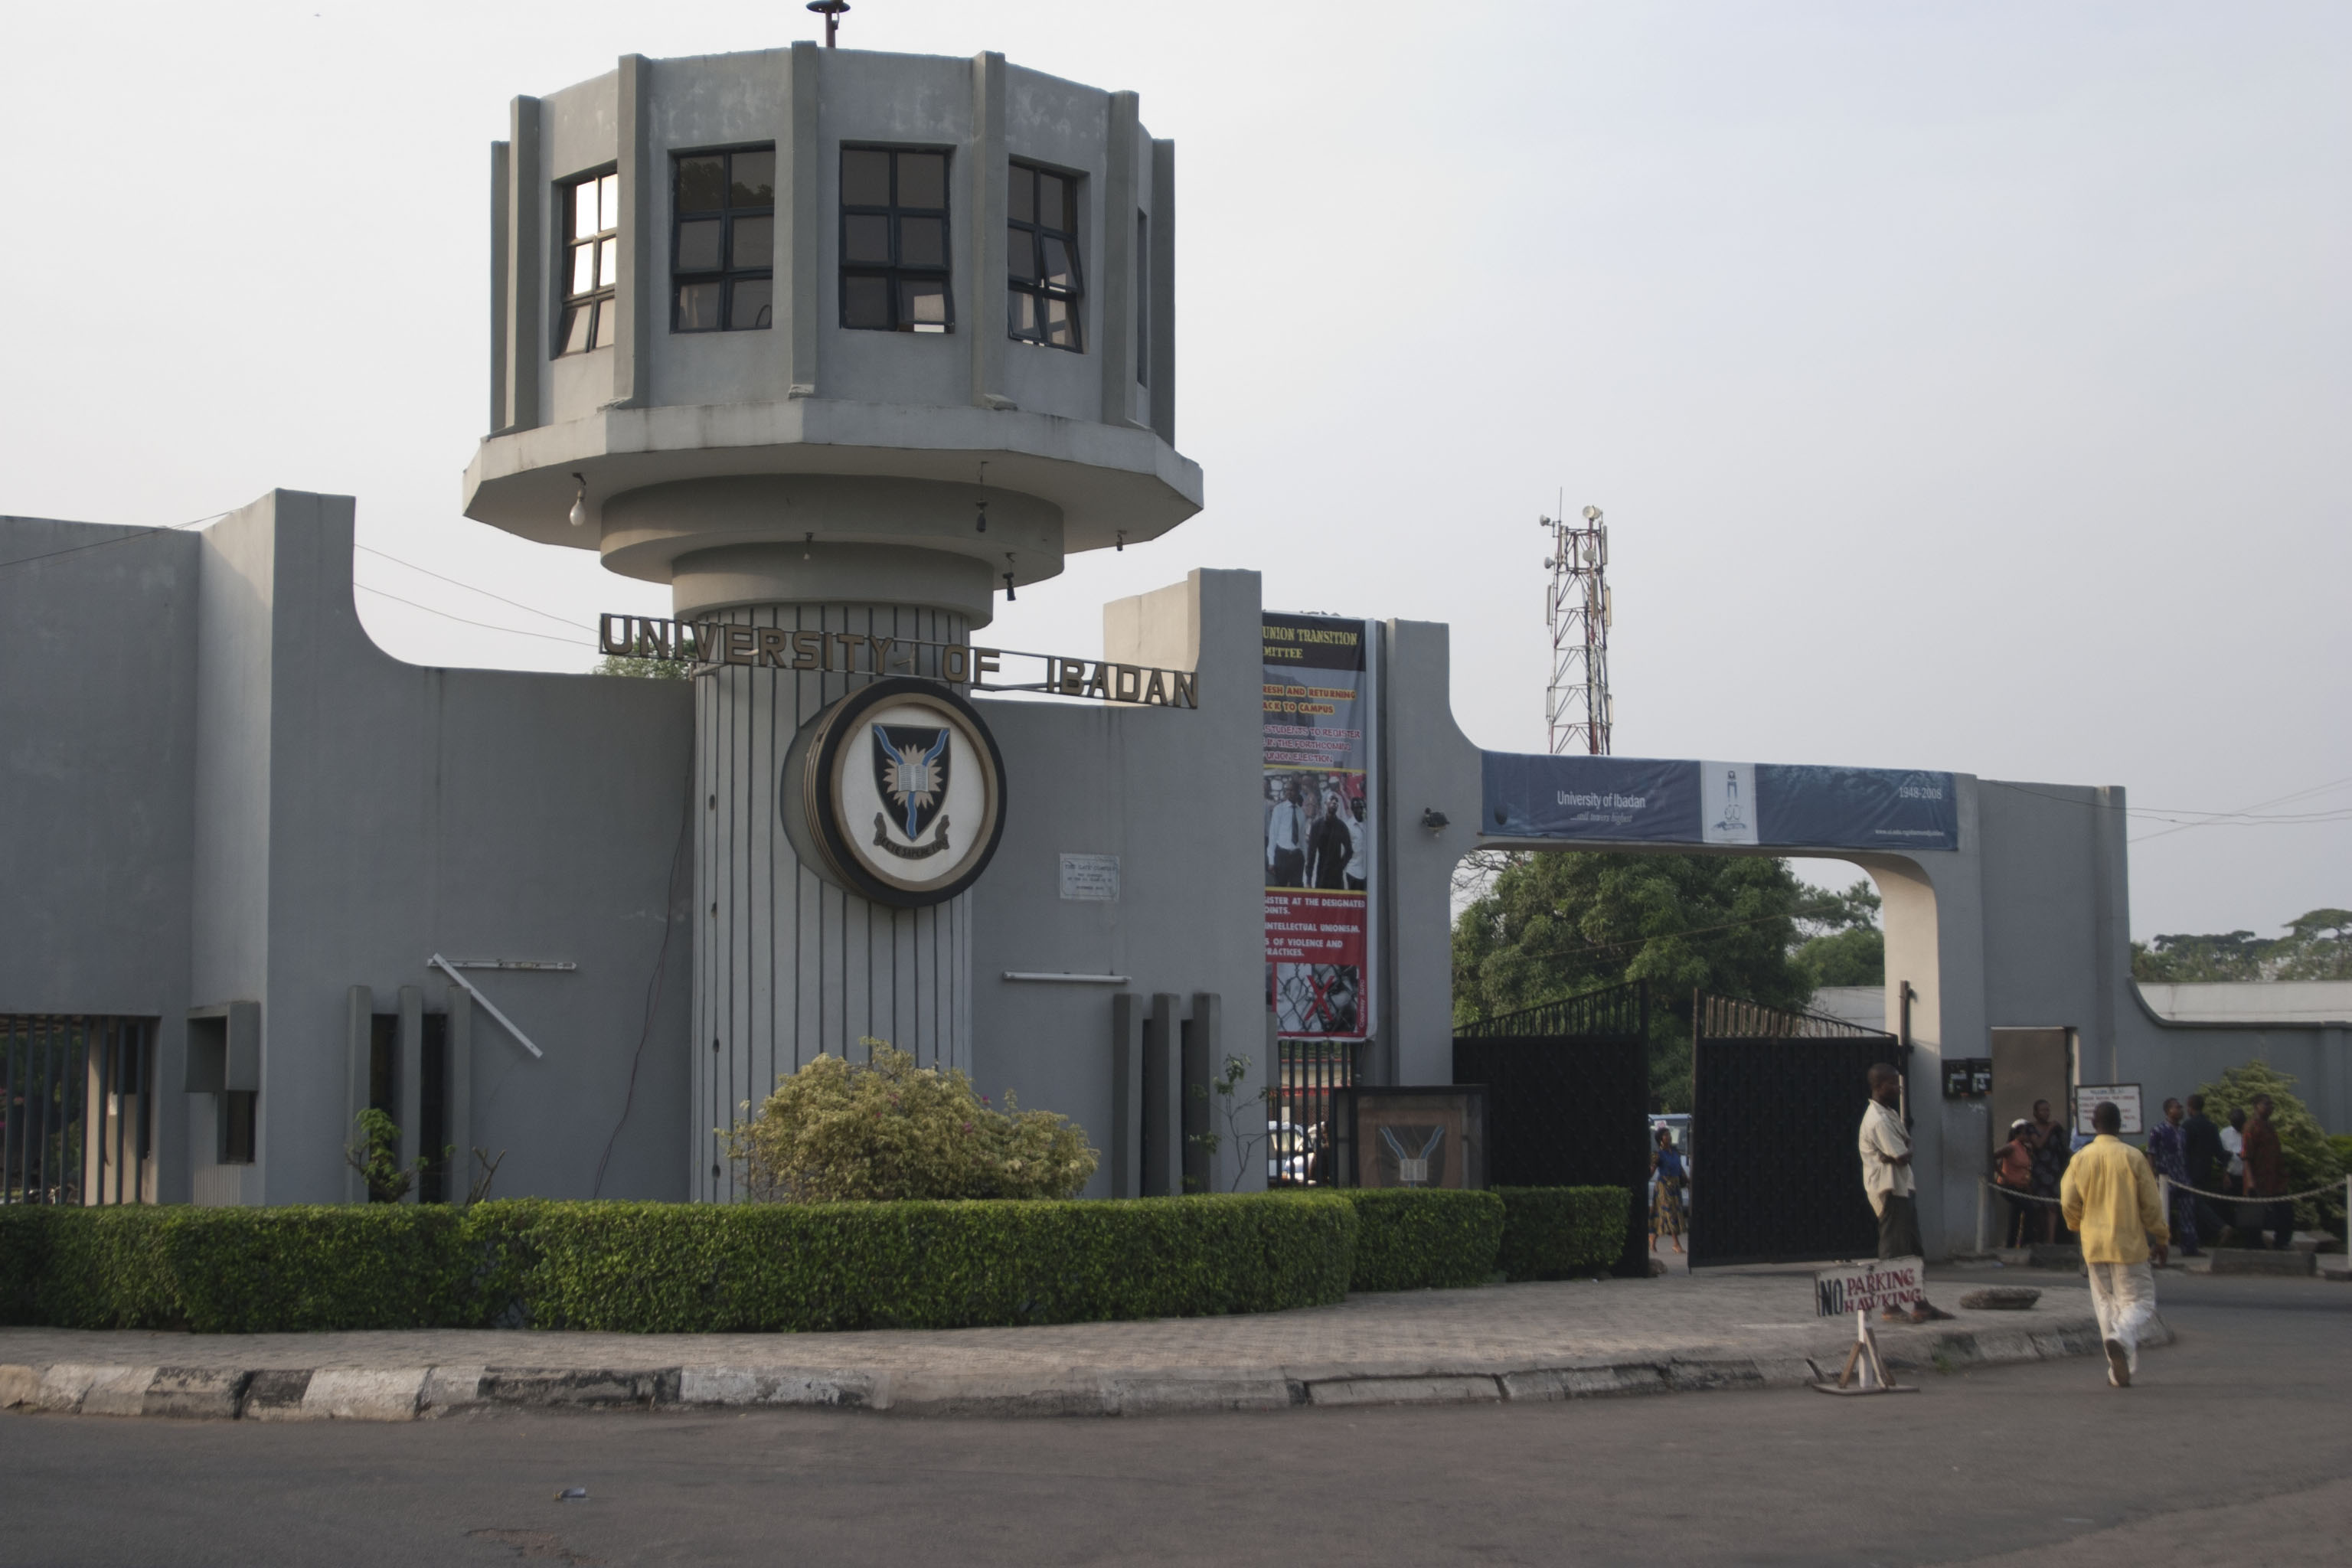 Group Threatens to Bomb University of Ibadan Before Independence Day